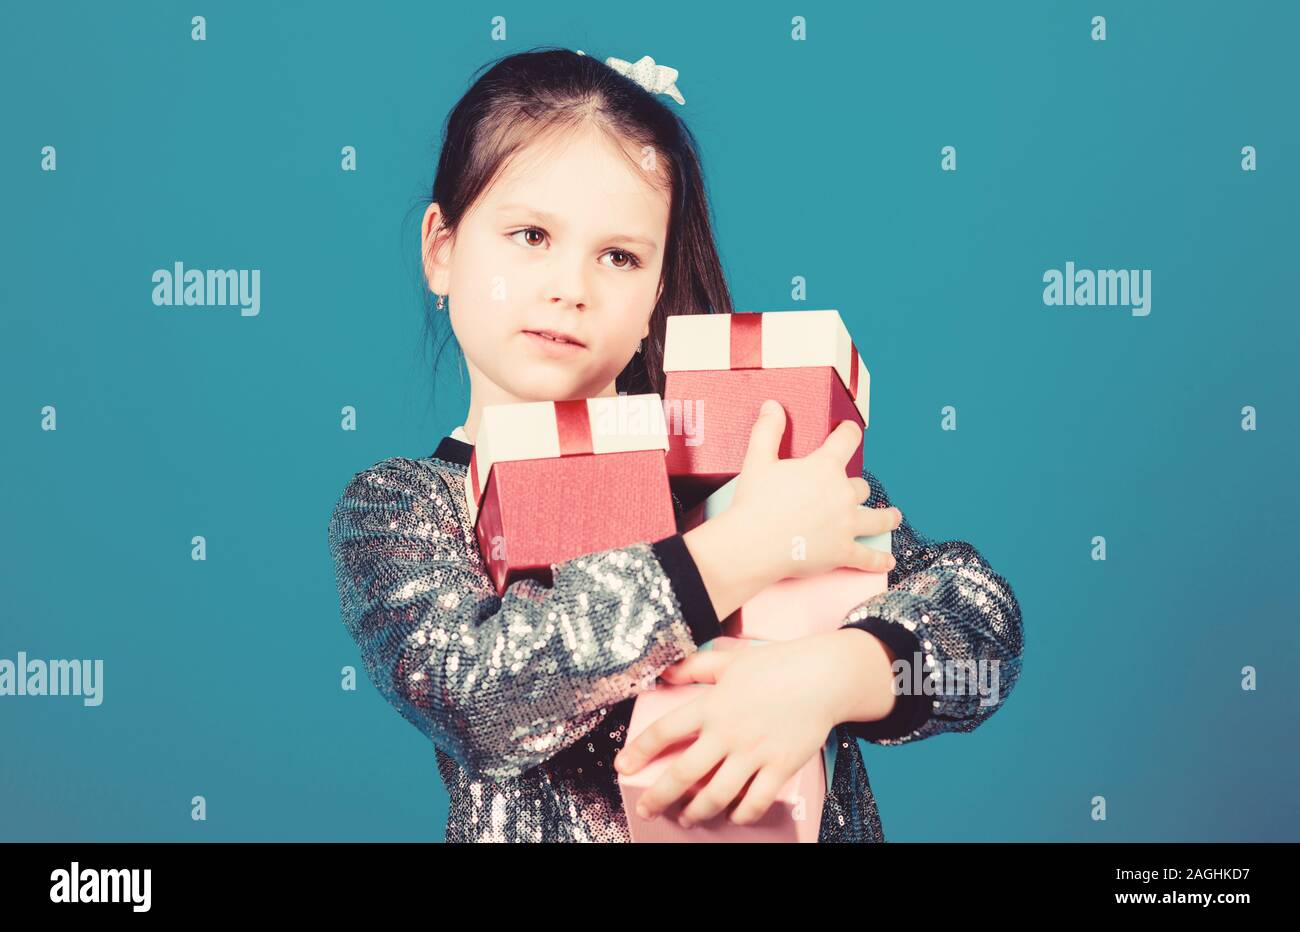 Shopping day. Child carry lot gift boxes. Kids fashion. Surprise gift box. Birthday wish list. Special happens every day. Shop for what you want. Girl Stock Photo